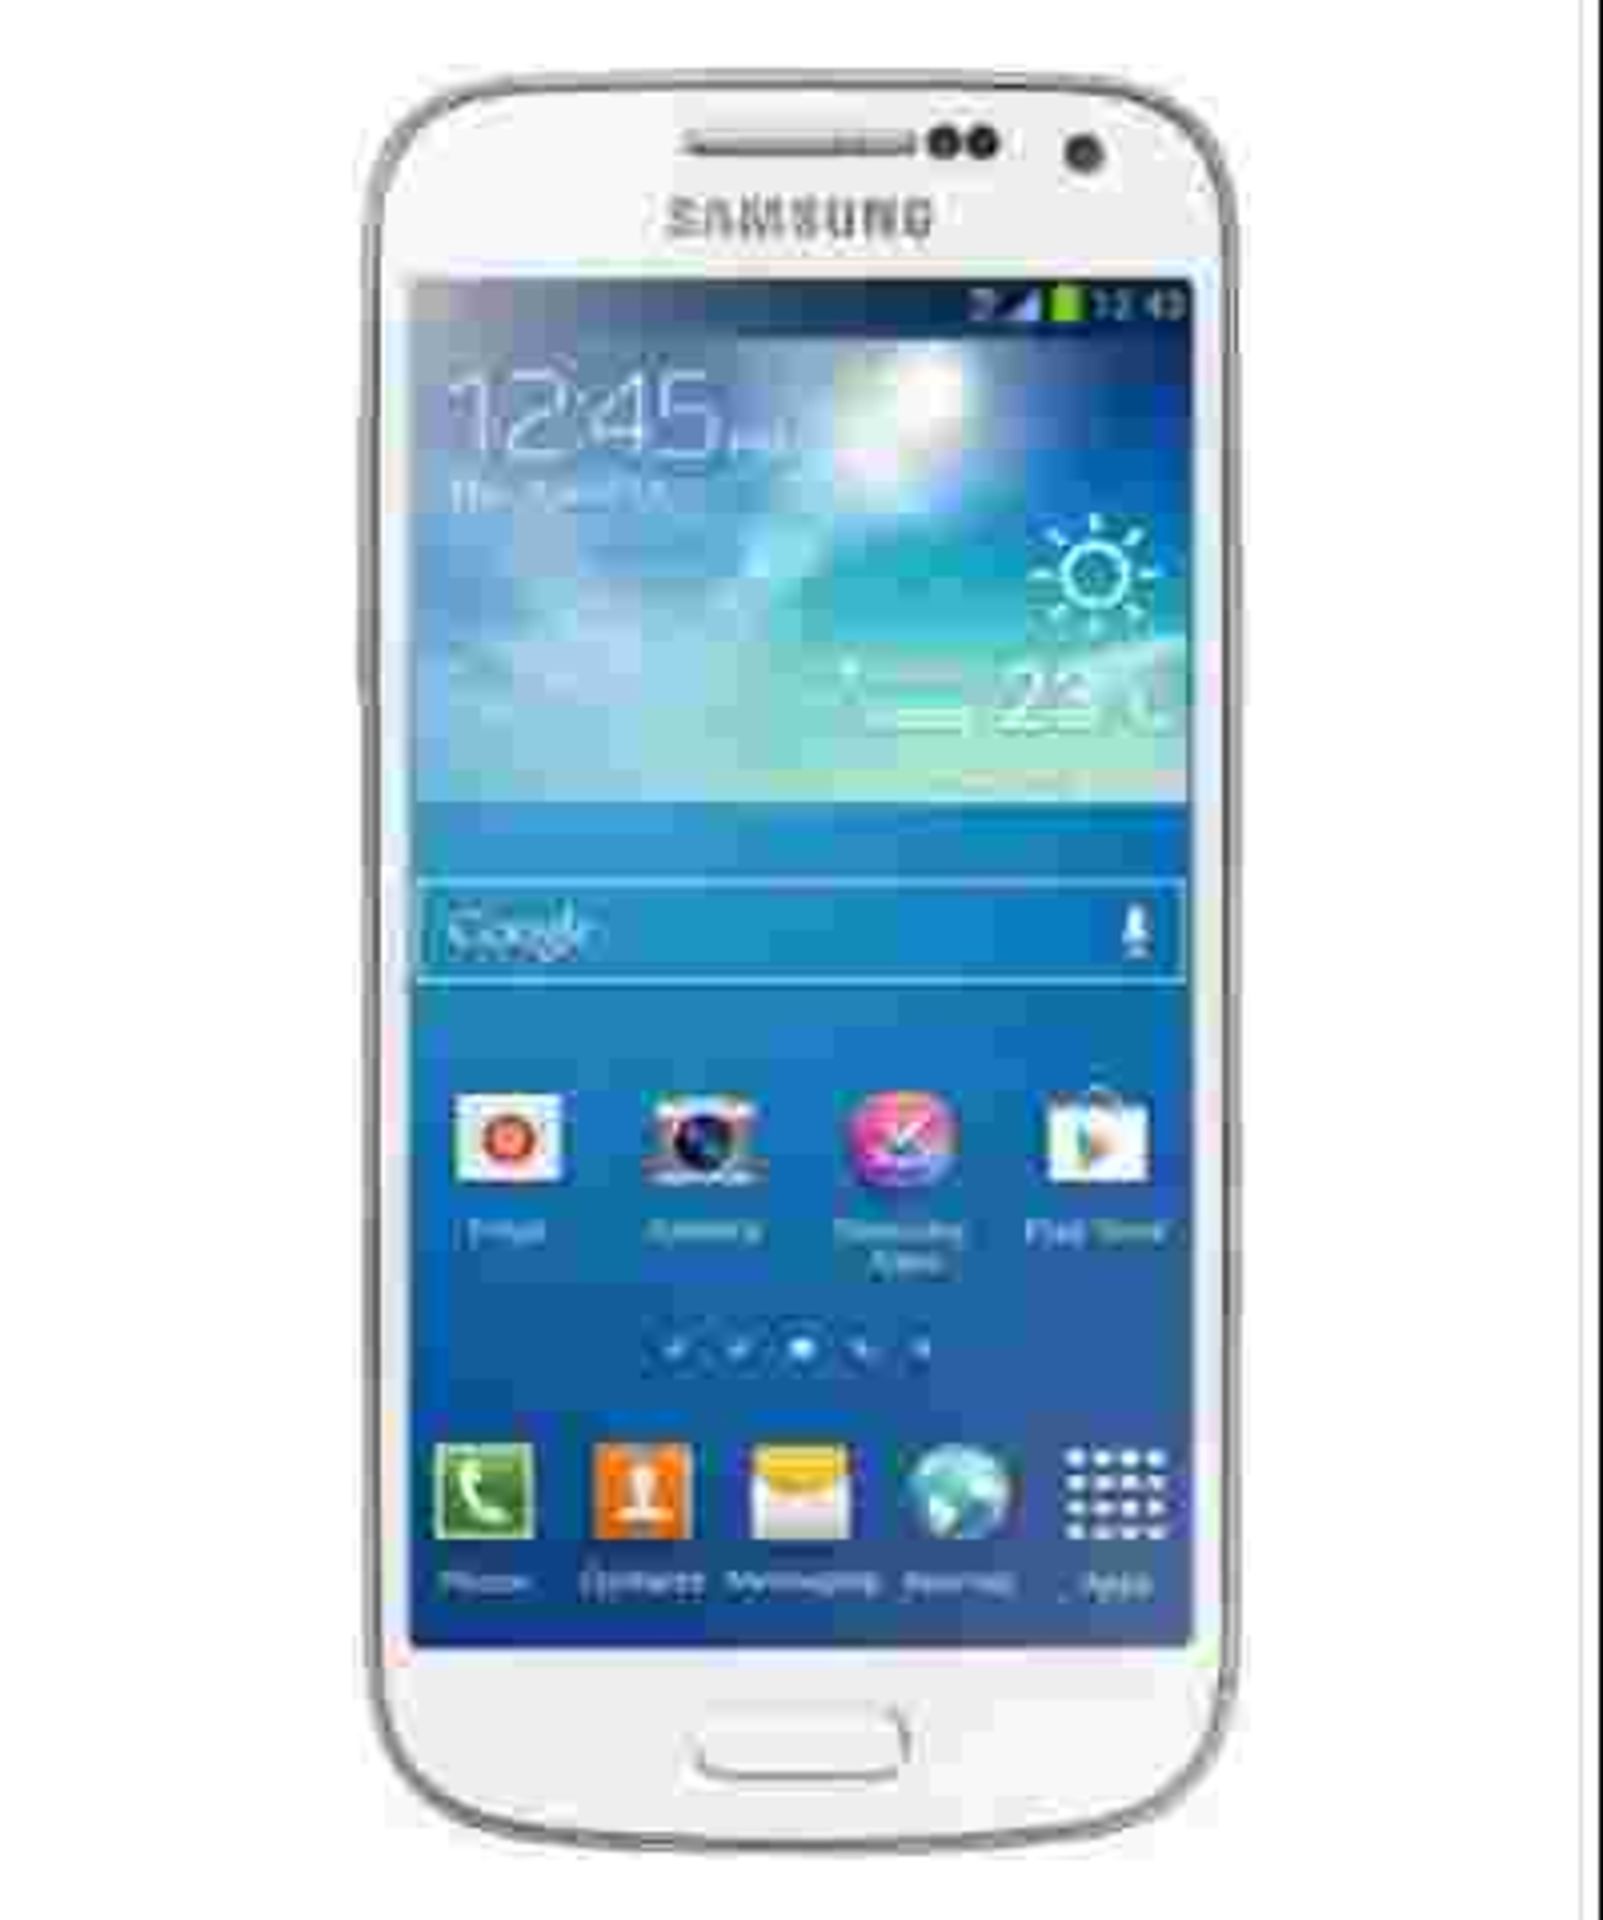 Grade A Samsung S4 Mini(I9190) Colours May Vary Item available from approx 27th February